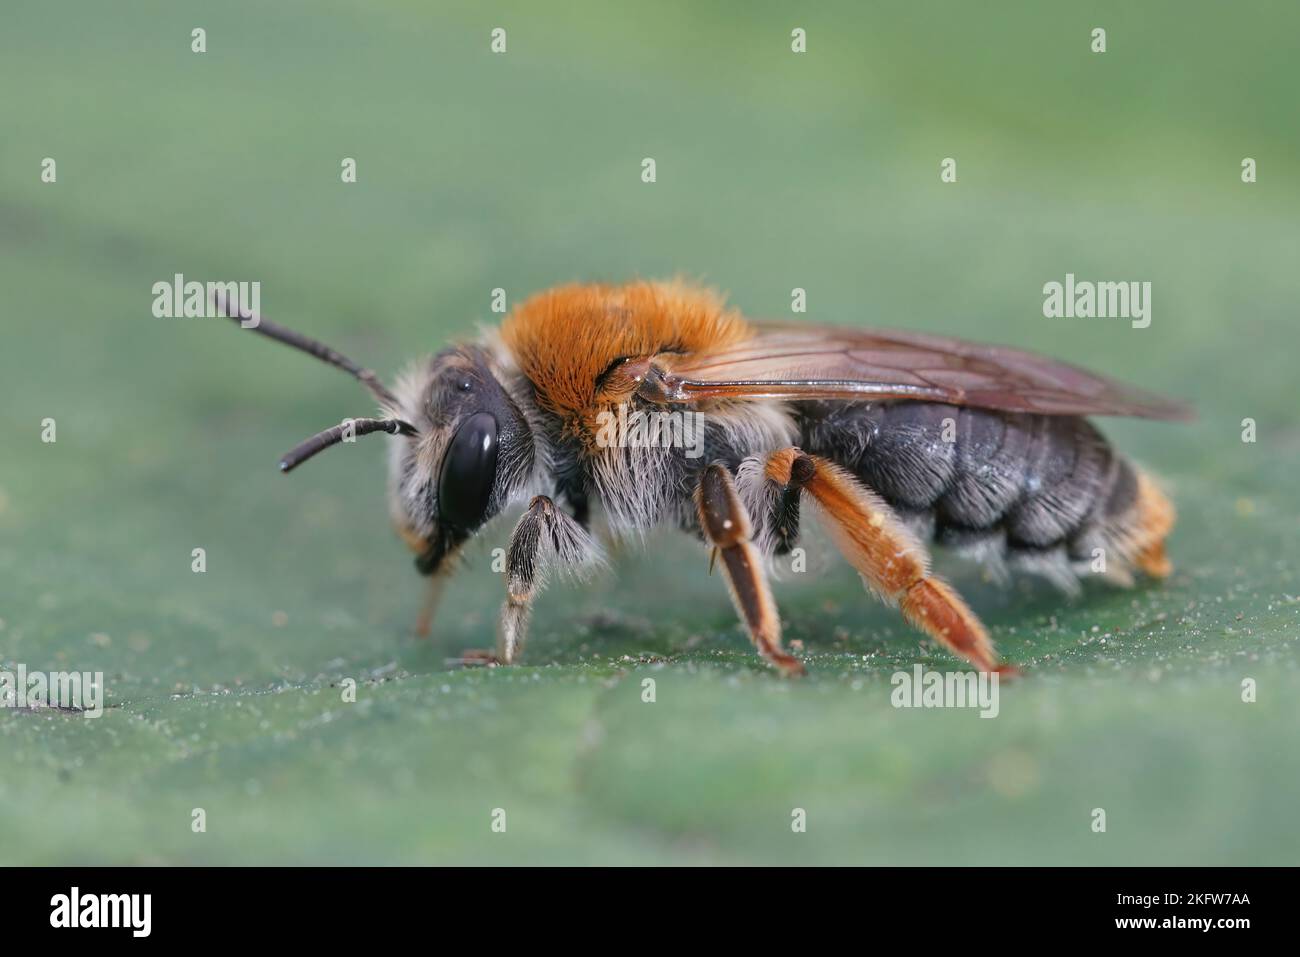 Detailed closeup on a colorful female Orange tailed mining bee, Andrena haemorrhoa on a green leaf Stock Photo